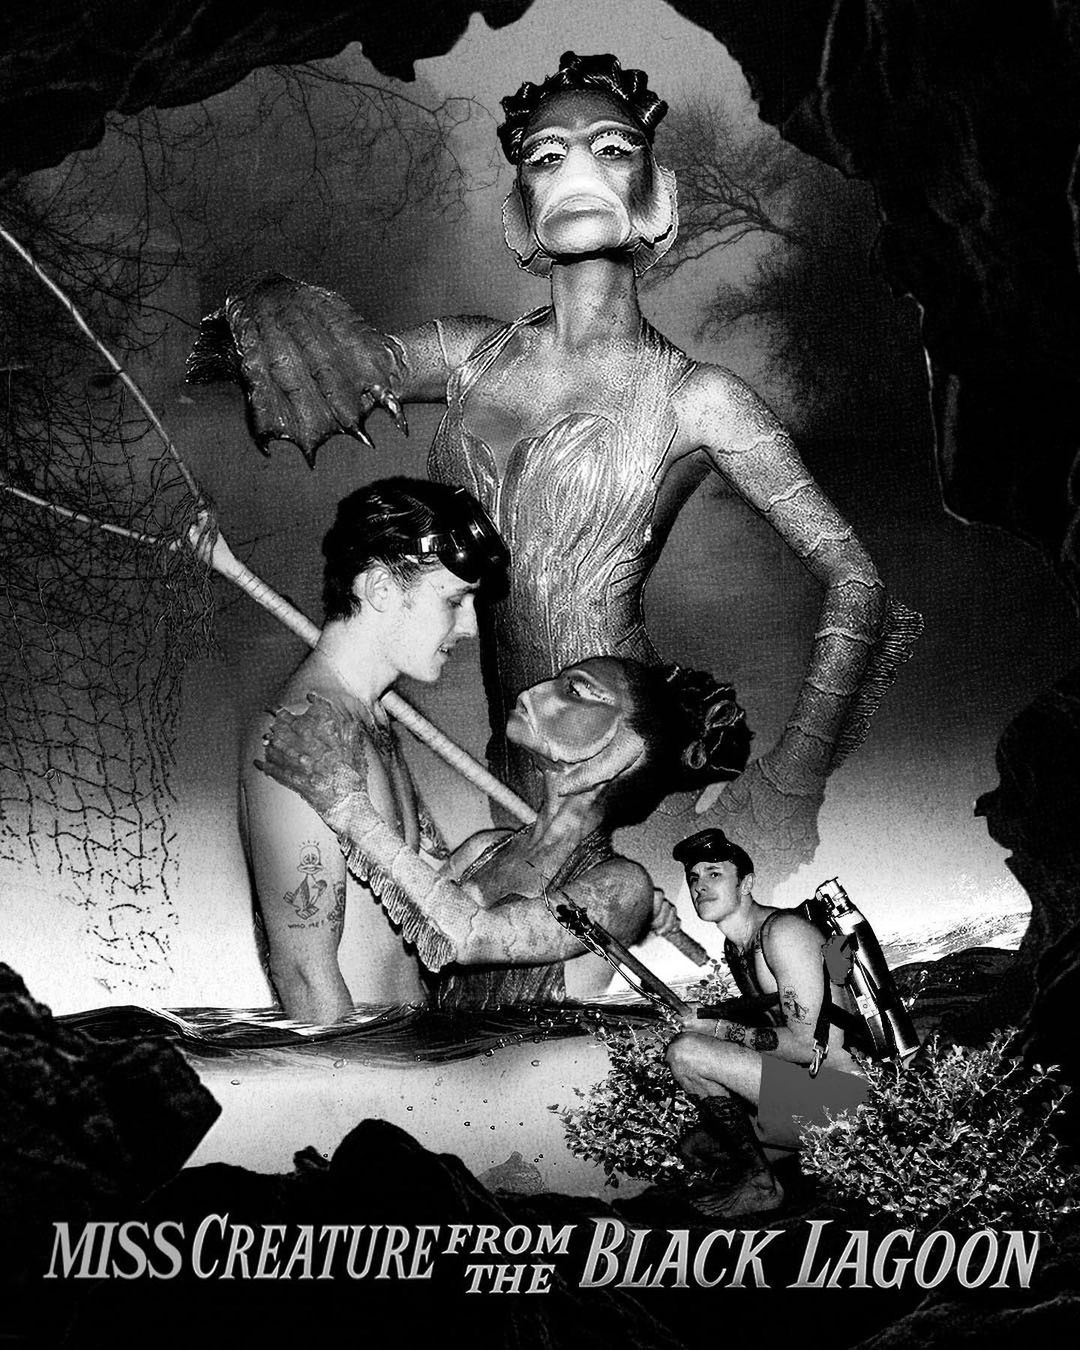 Ariana Grande is the Creature from the Black Lagoon!